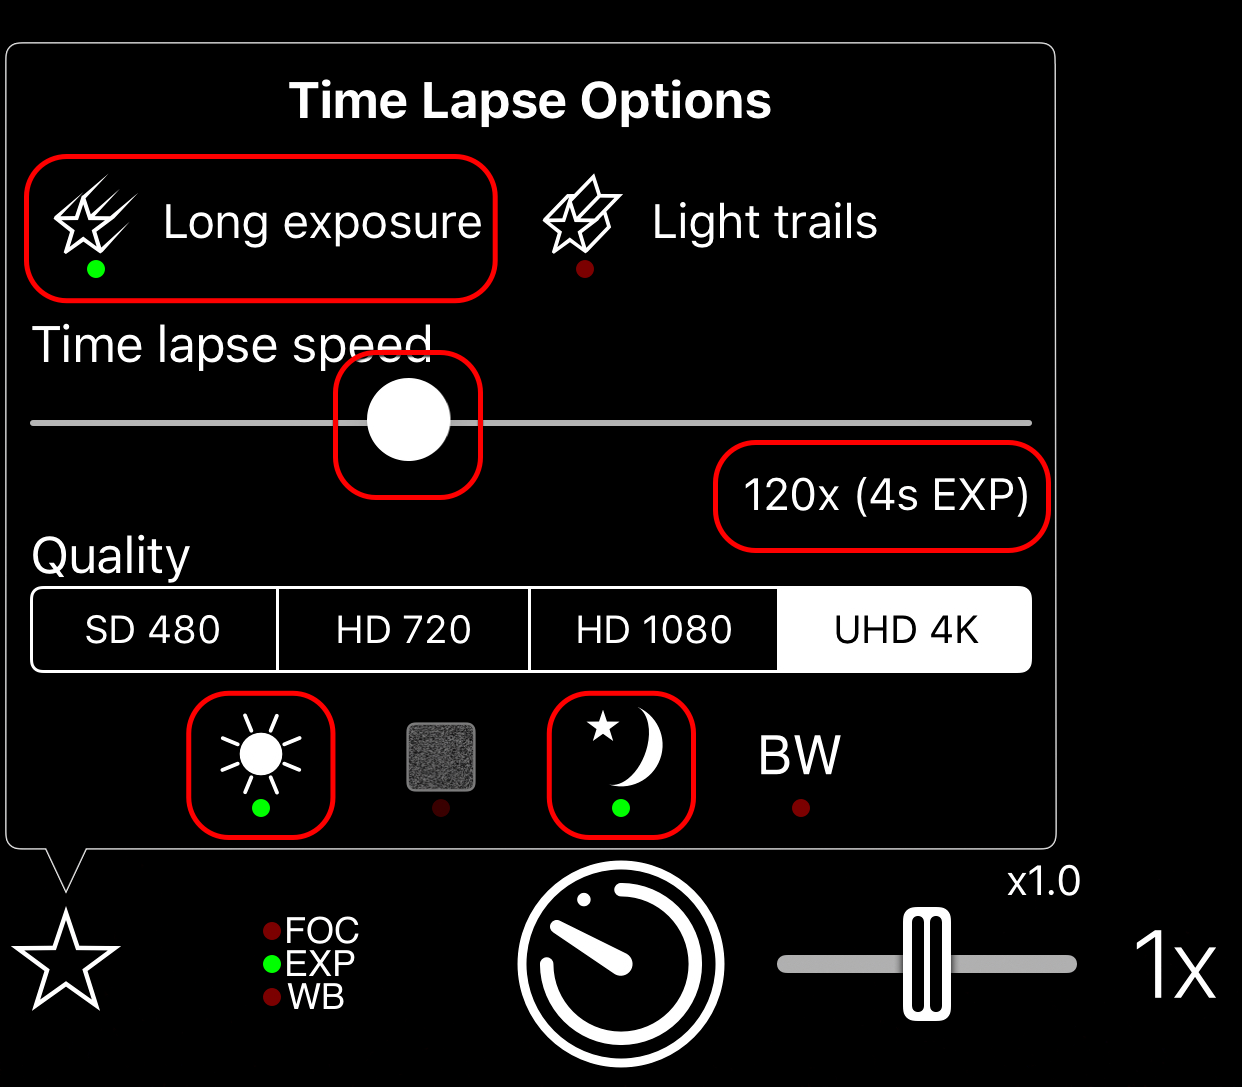 The time lapse options panel